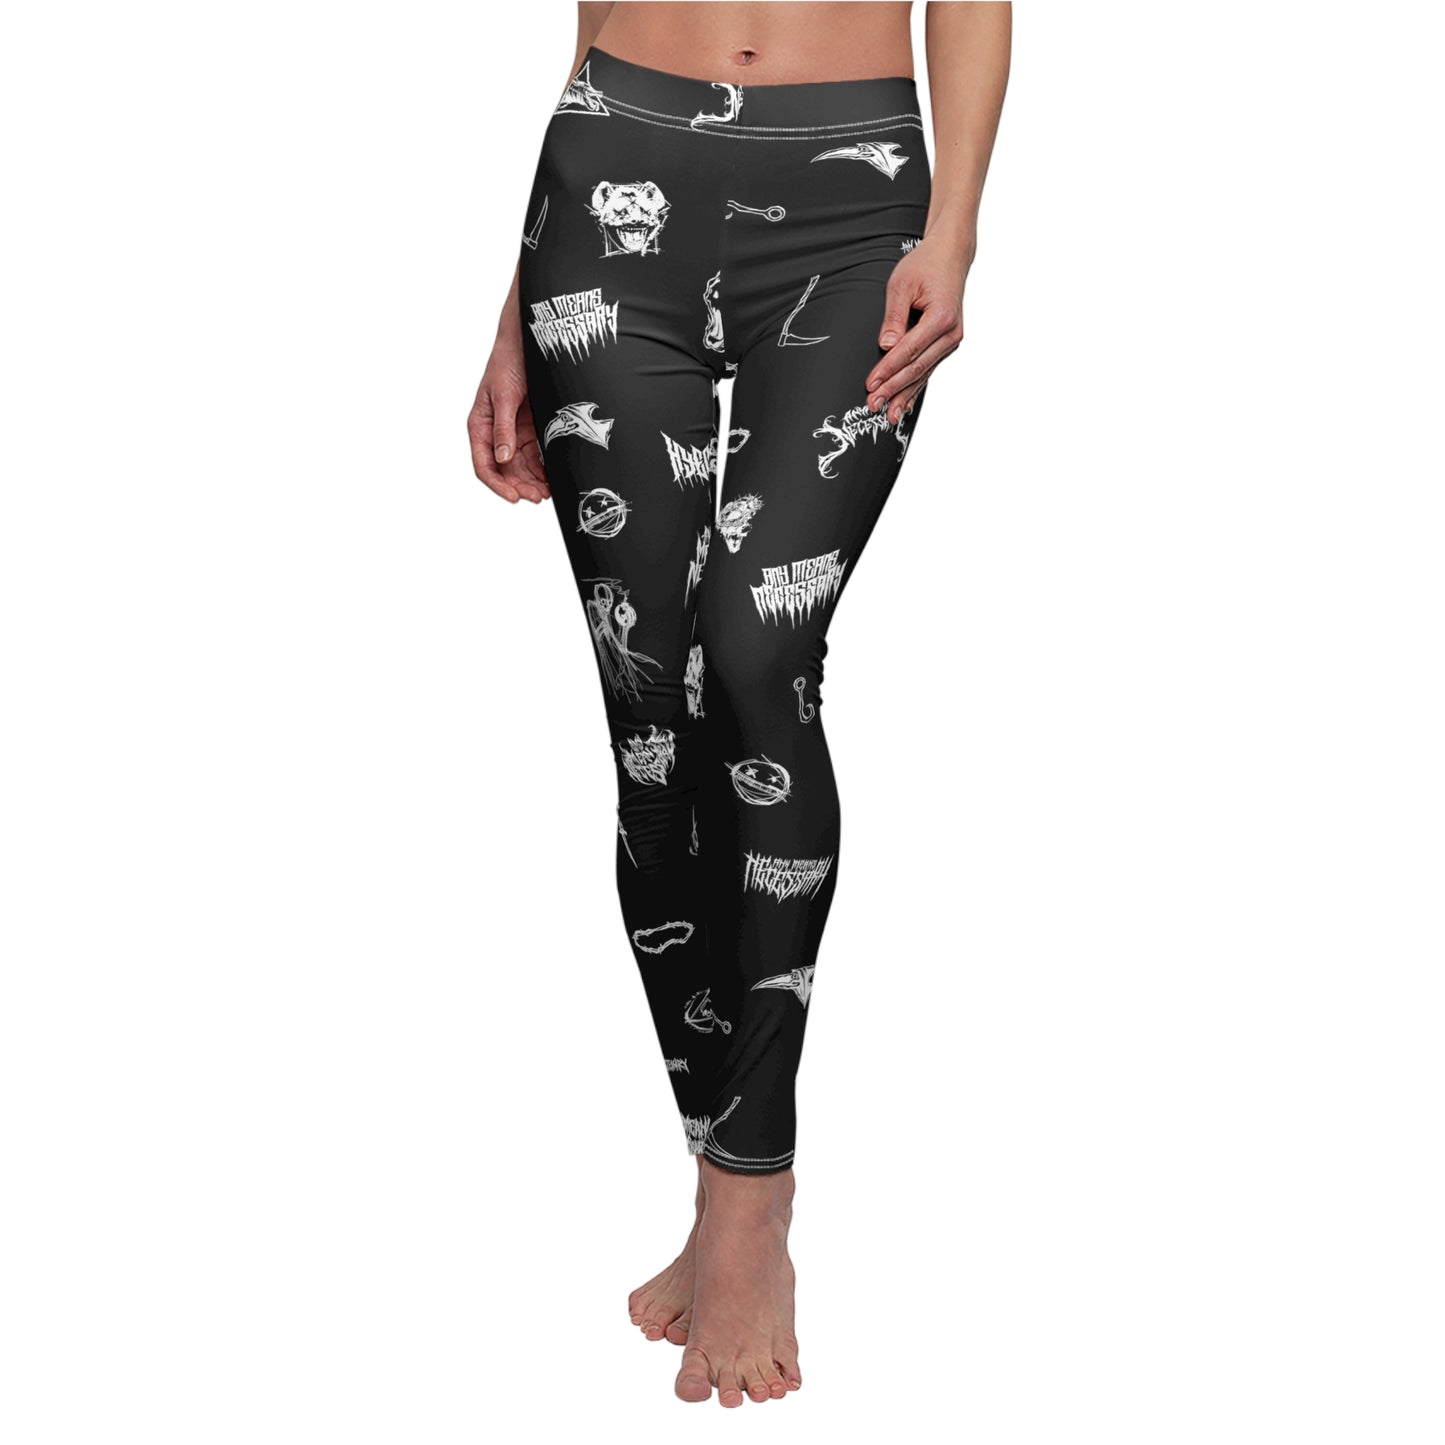 
                  
                    any means necessary shawn coss wingbats leggings black pose
                  
                